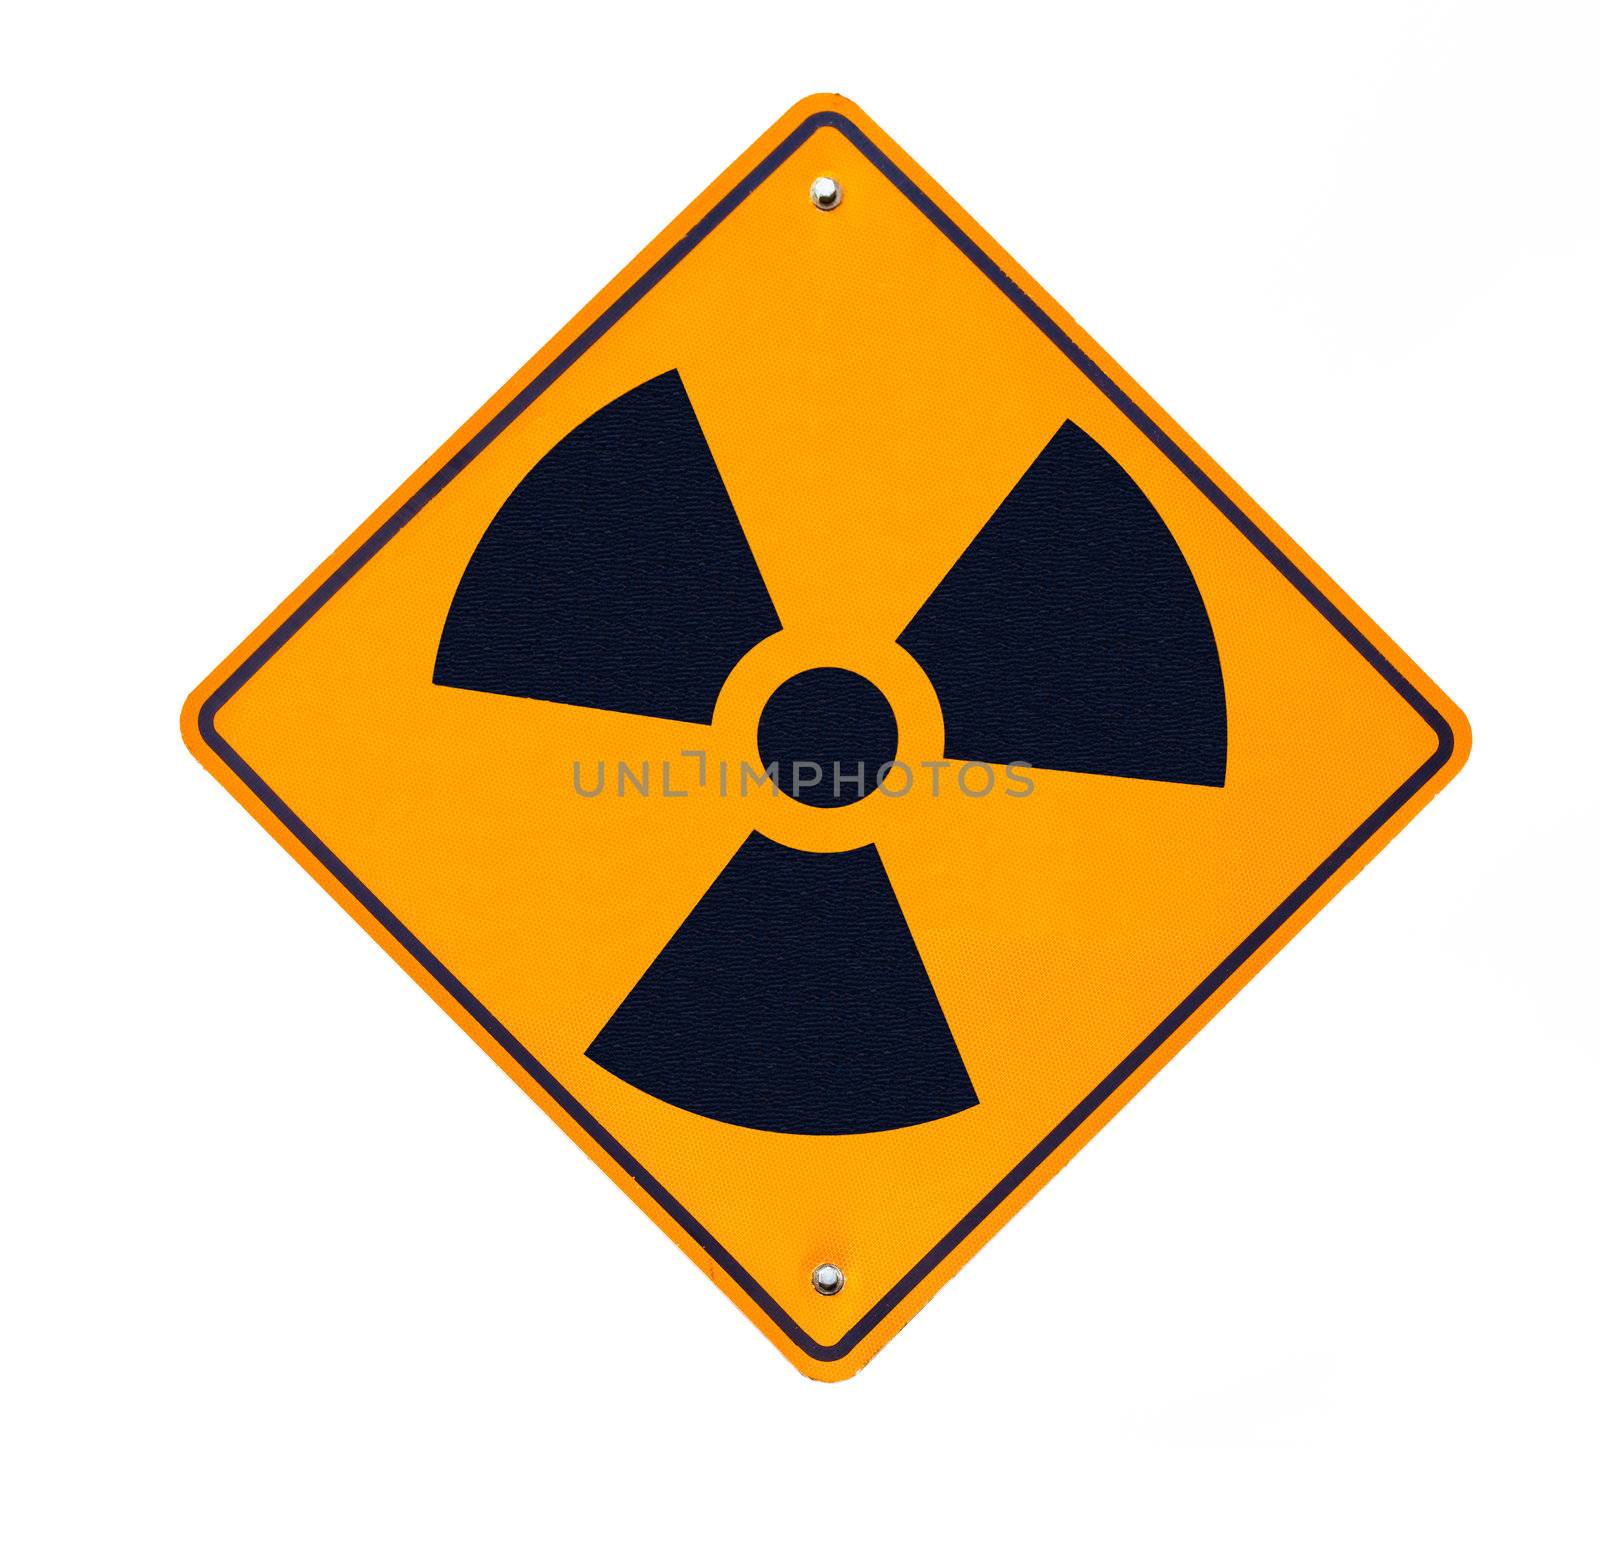 Radioactive road sign isolated on white by PiLens